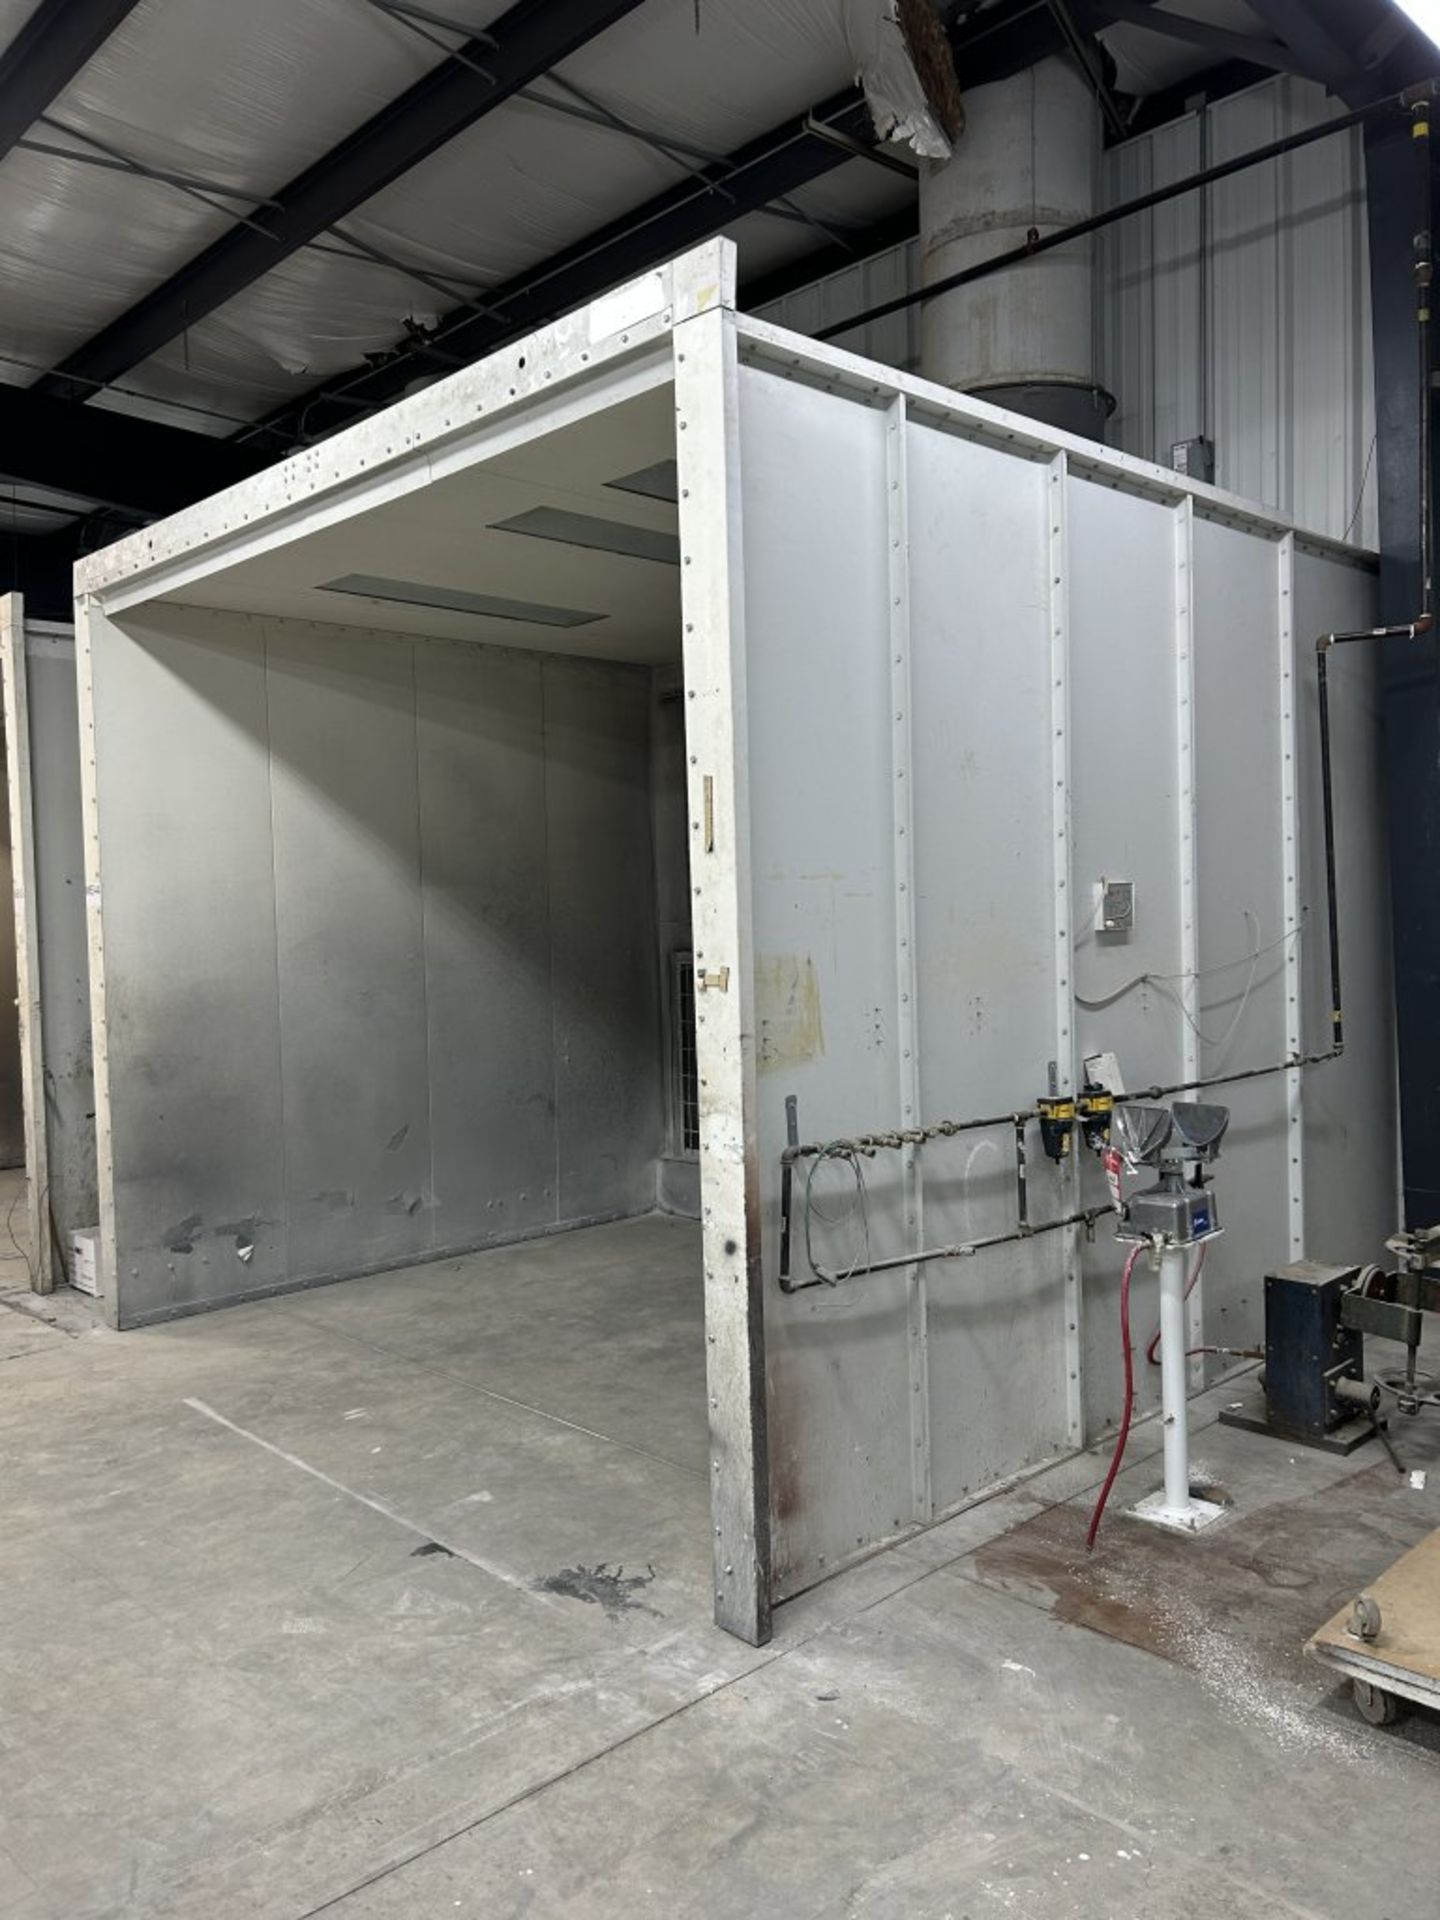 MID-STATE INDUSTRIAL PAINT BOOTH, 13' X 13.5' X 10.5', BUYER IS RESPONSIBLE FOR PROPER REMOVAL - Image 3 of 11